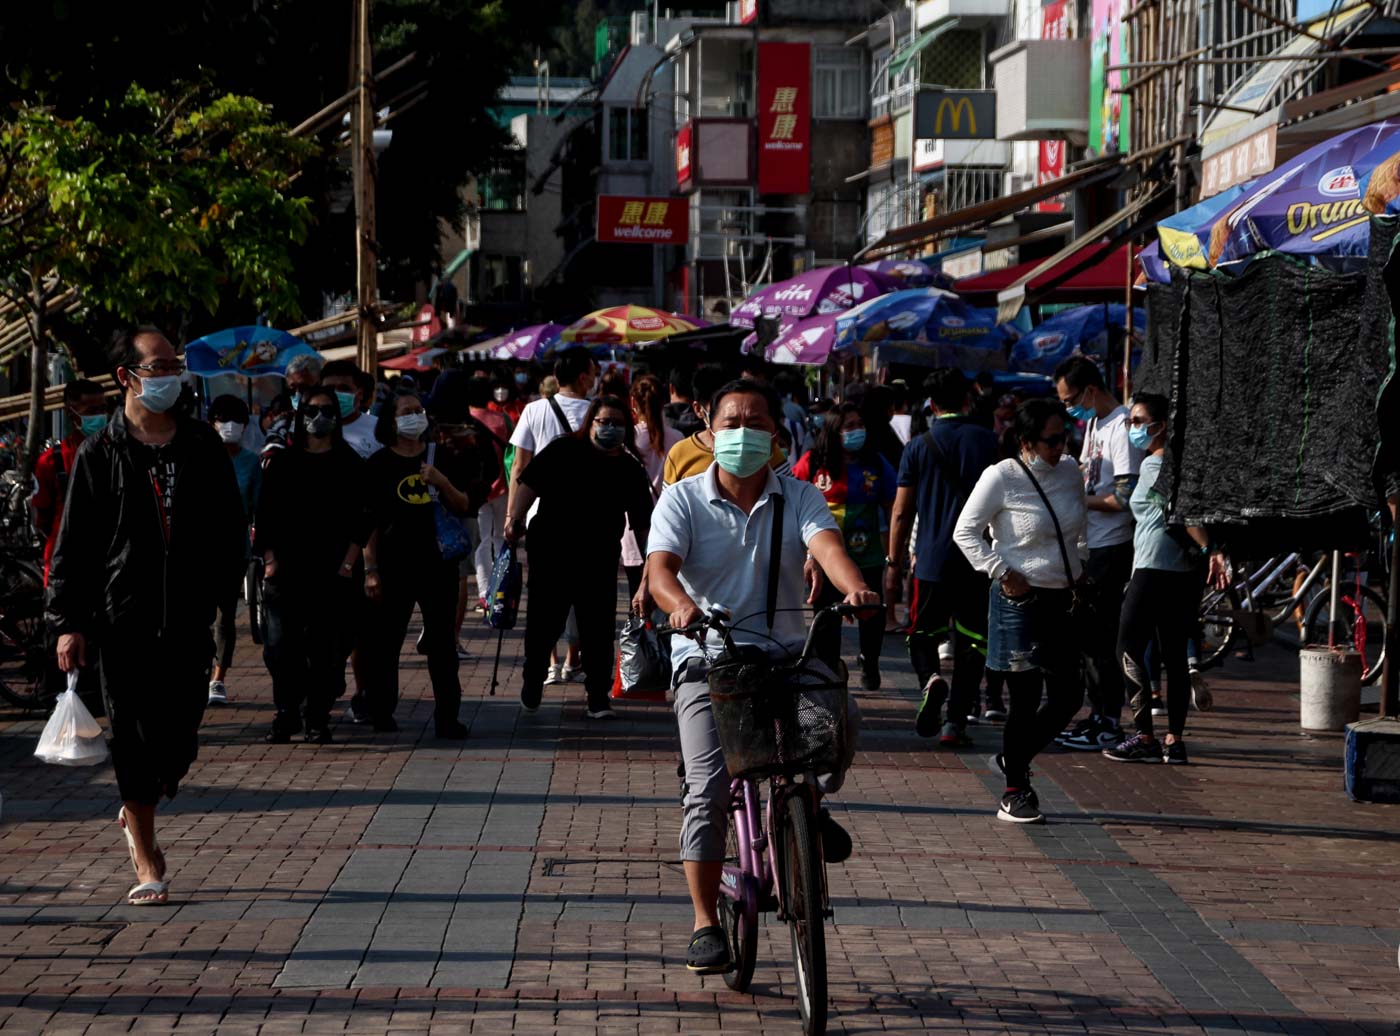 DAY TRIP. Cheung Chau Island, as seen here on April 12, is a popular location for residents to take a day trip. File photo by Tommy Walker/Rappler 